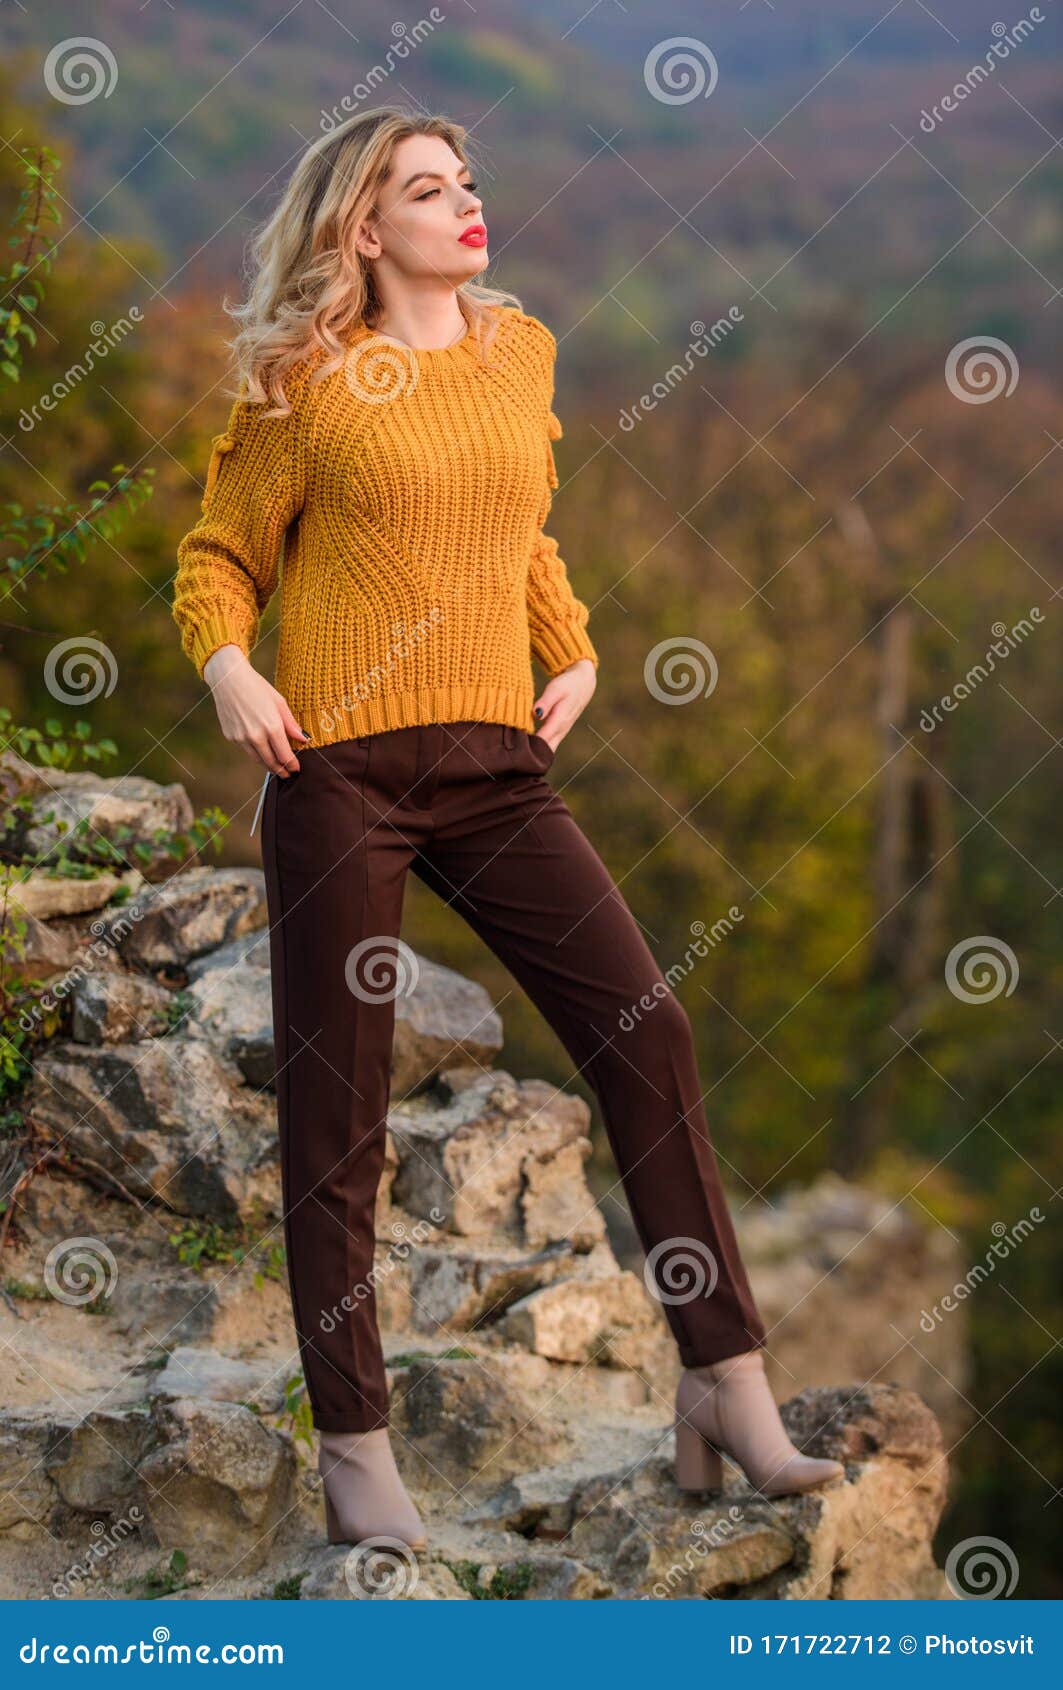 Best Way To Escape from the City. Fashion Model in Knitted Sweater ...